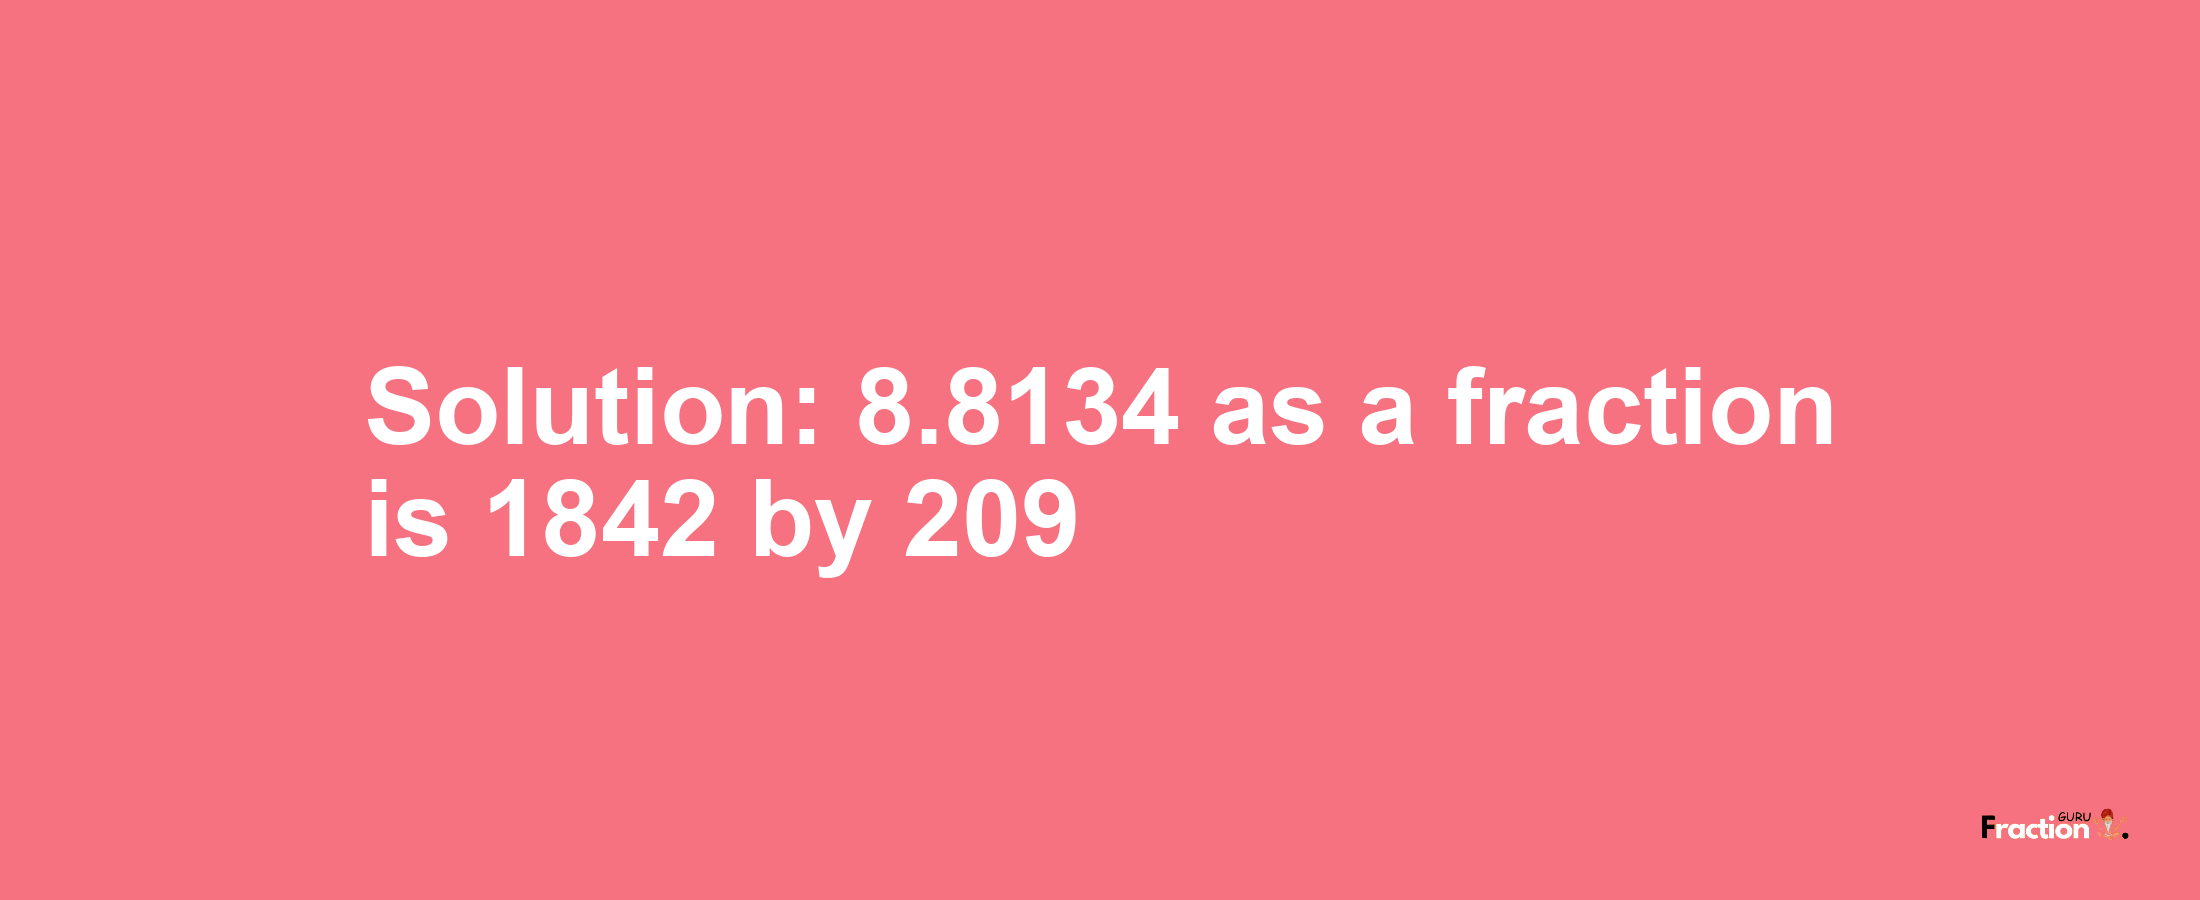 Solution:8.8134 as a fraction is 1842/209